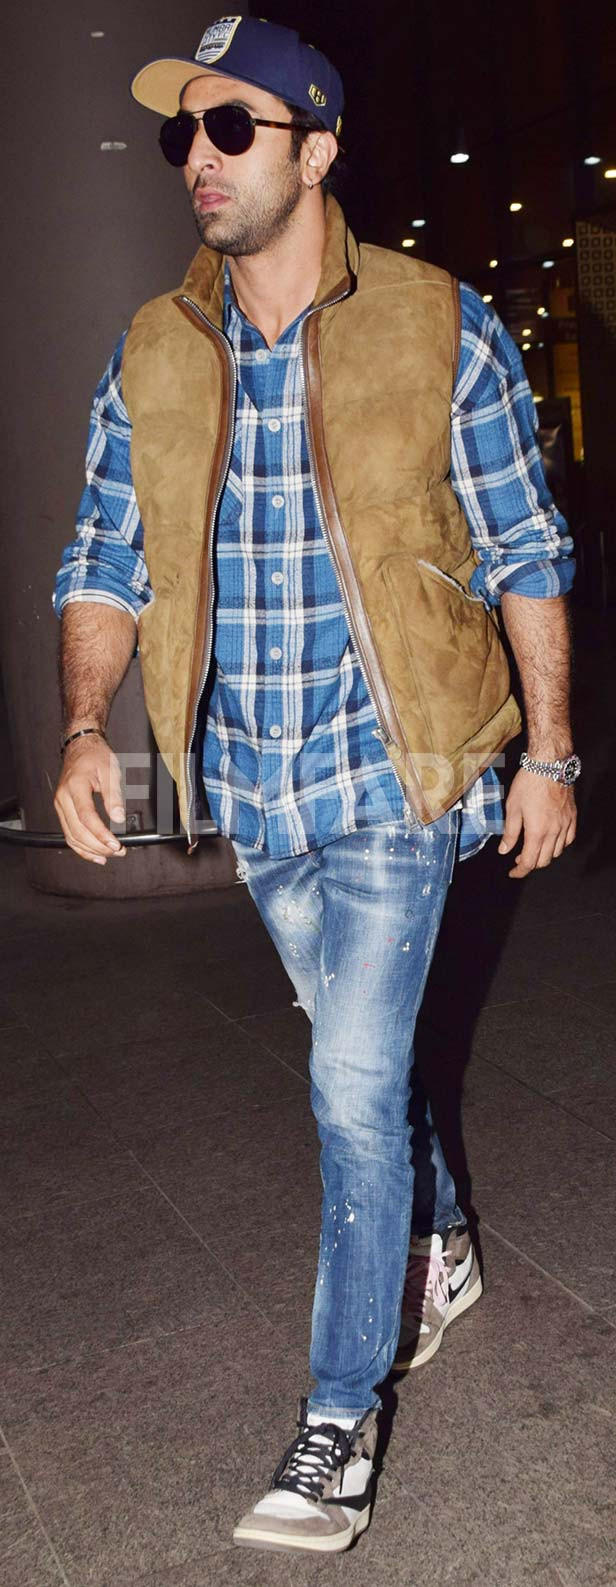 Pepe Jeans London - Ranbir Kapoor has struck all the right fashion chords  dressed in a blue plaid shirt & distressed denims. You can now recreate his  look from our latest #AutumnWinter